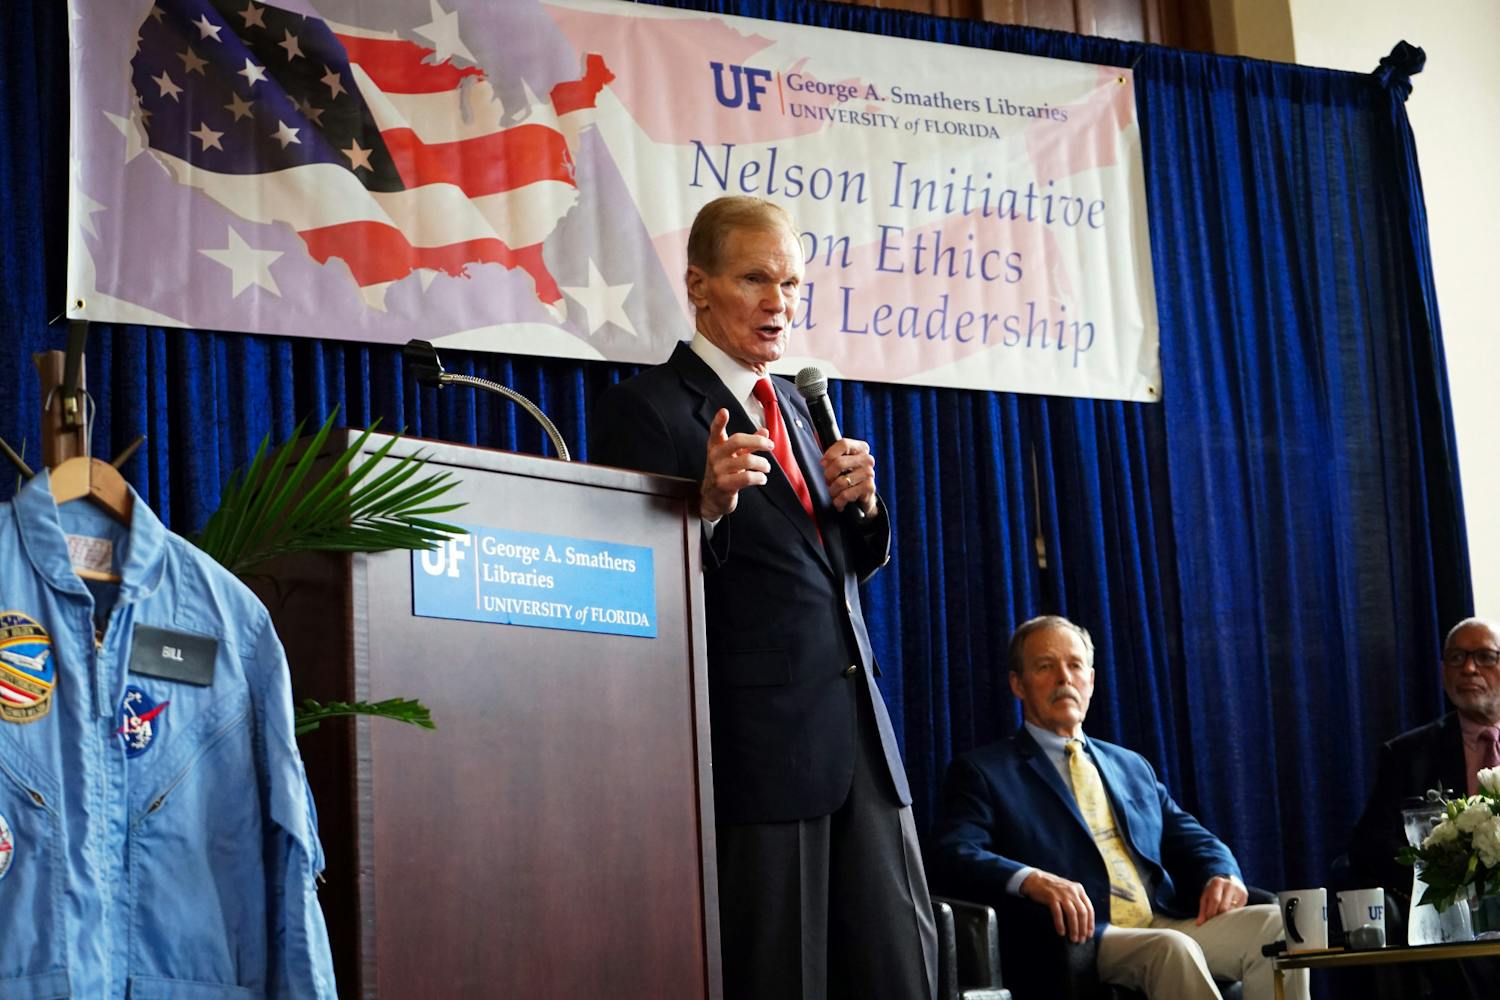 At UF&#x27;s Smathers Library Grand Reading Room, Bill Nelson, former U.S Senator for Florida and current administrator for NASA, speaks at the Nelson Initiative on Ethics and Leadership. Nelson was joined by previous astronauts Charles Bolden and Robert Gibson Friday, Feb. 17, 2023. 